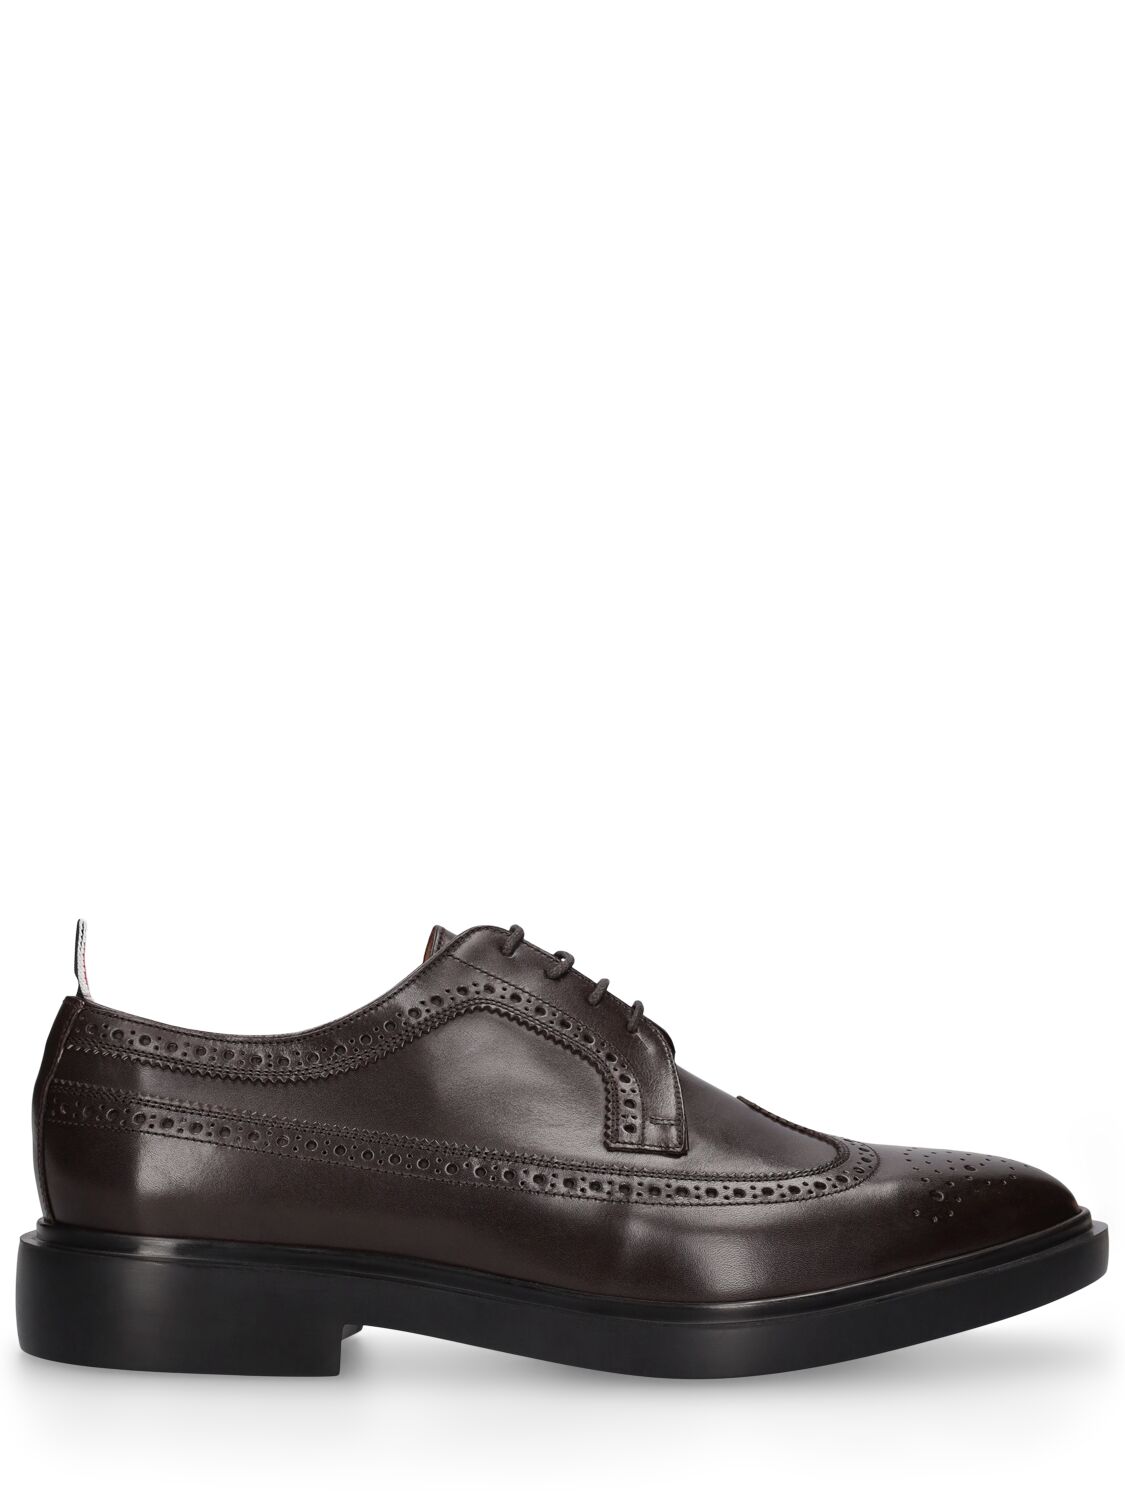 Thom Browne Longwing Brogue Leather Lace-up Shoes In Brown